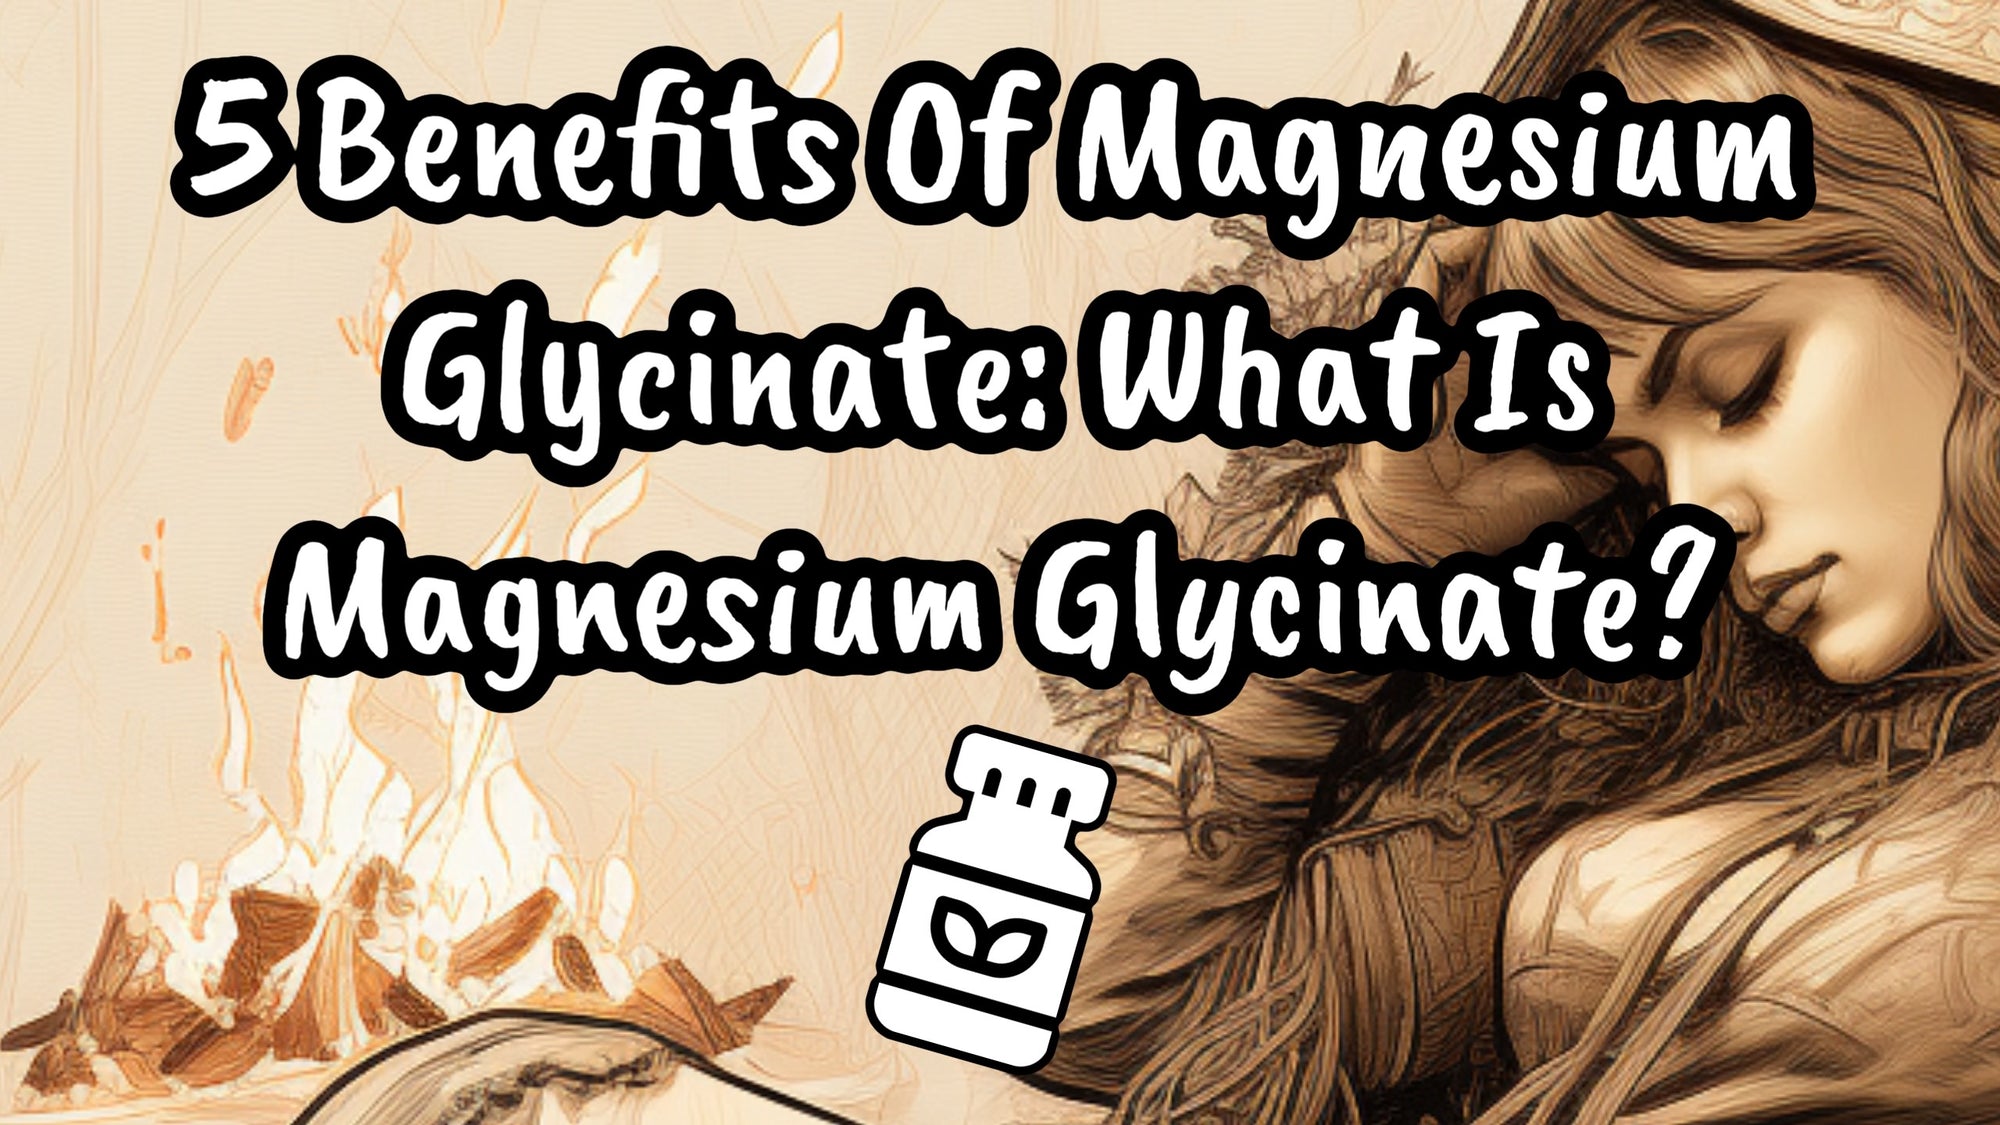 5 Benefits Of Magnesium Glycinate: What Is Magnesium Glycinate?